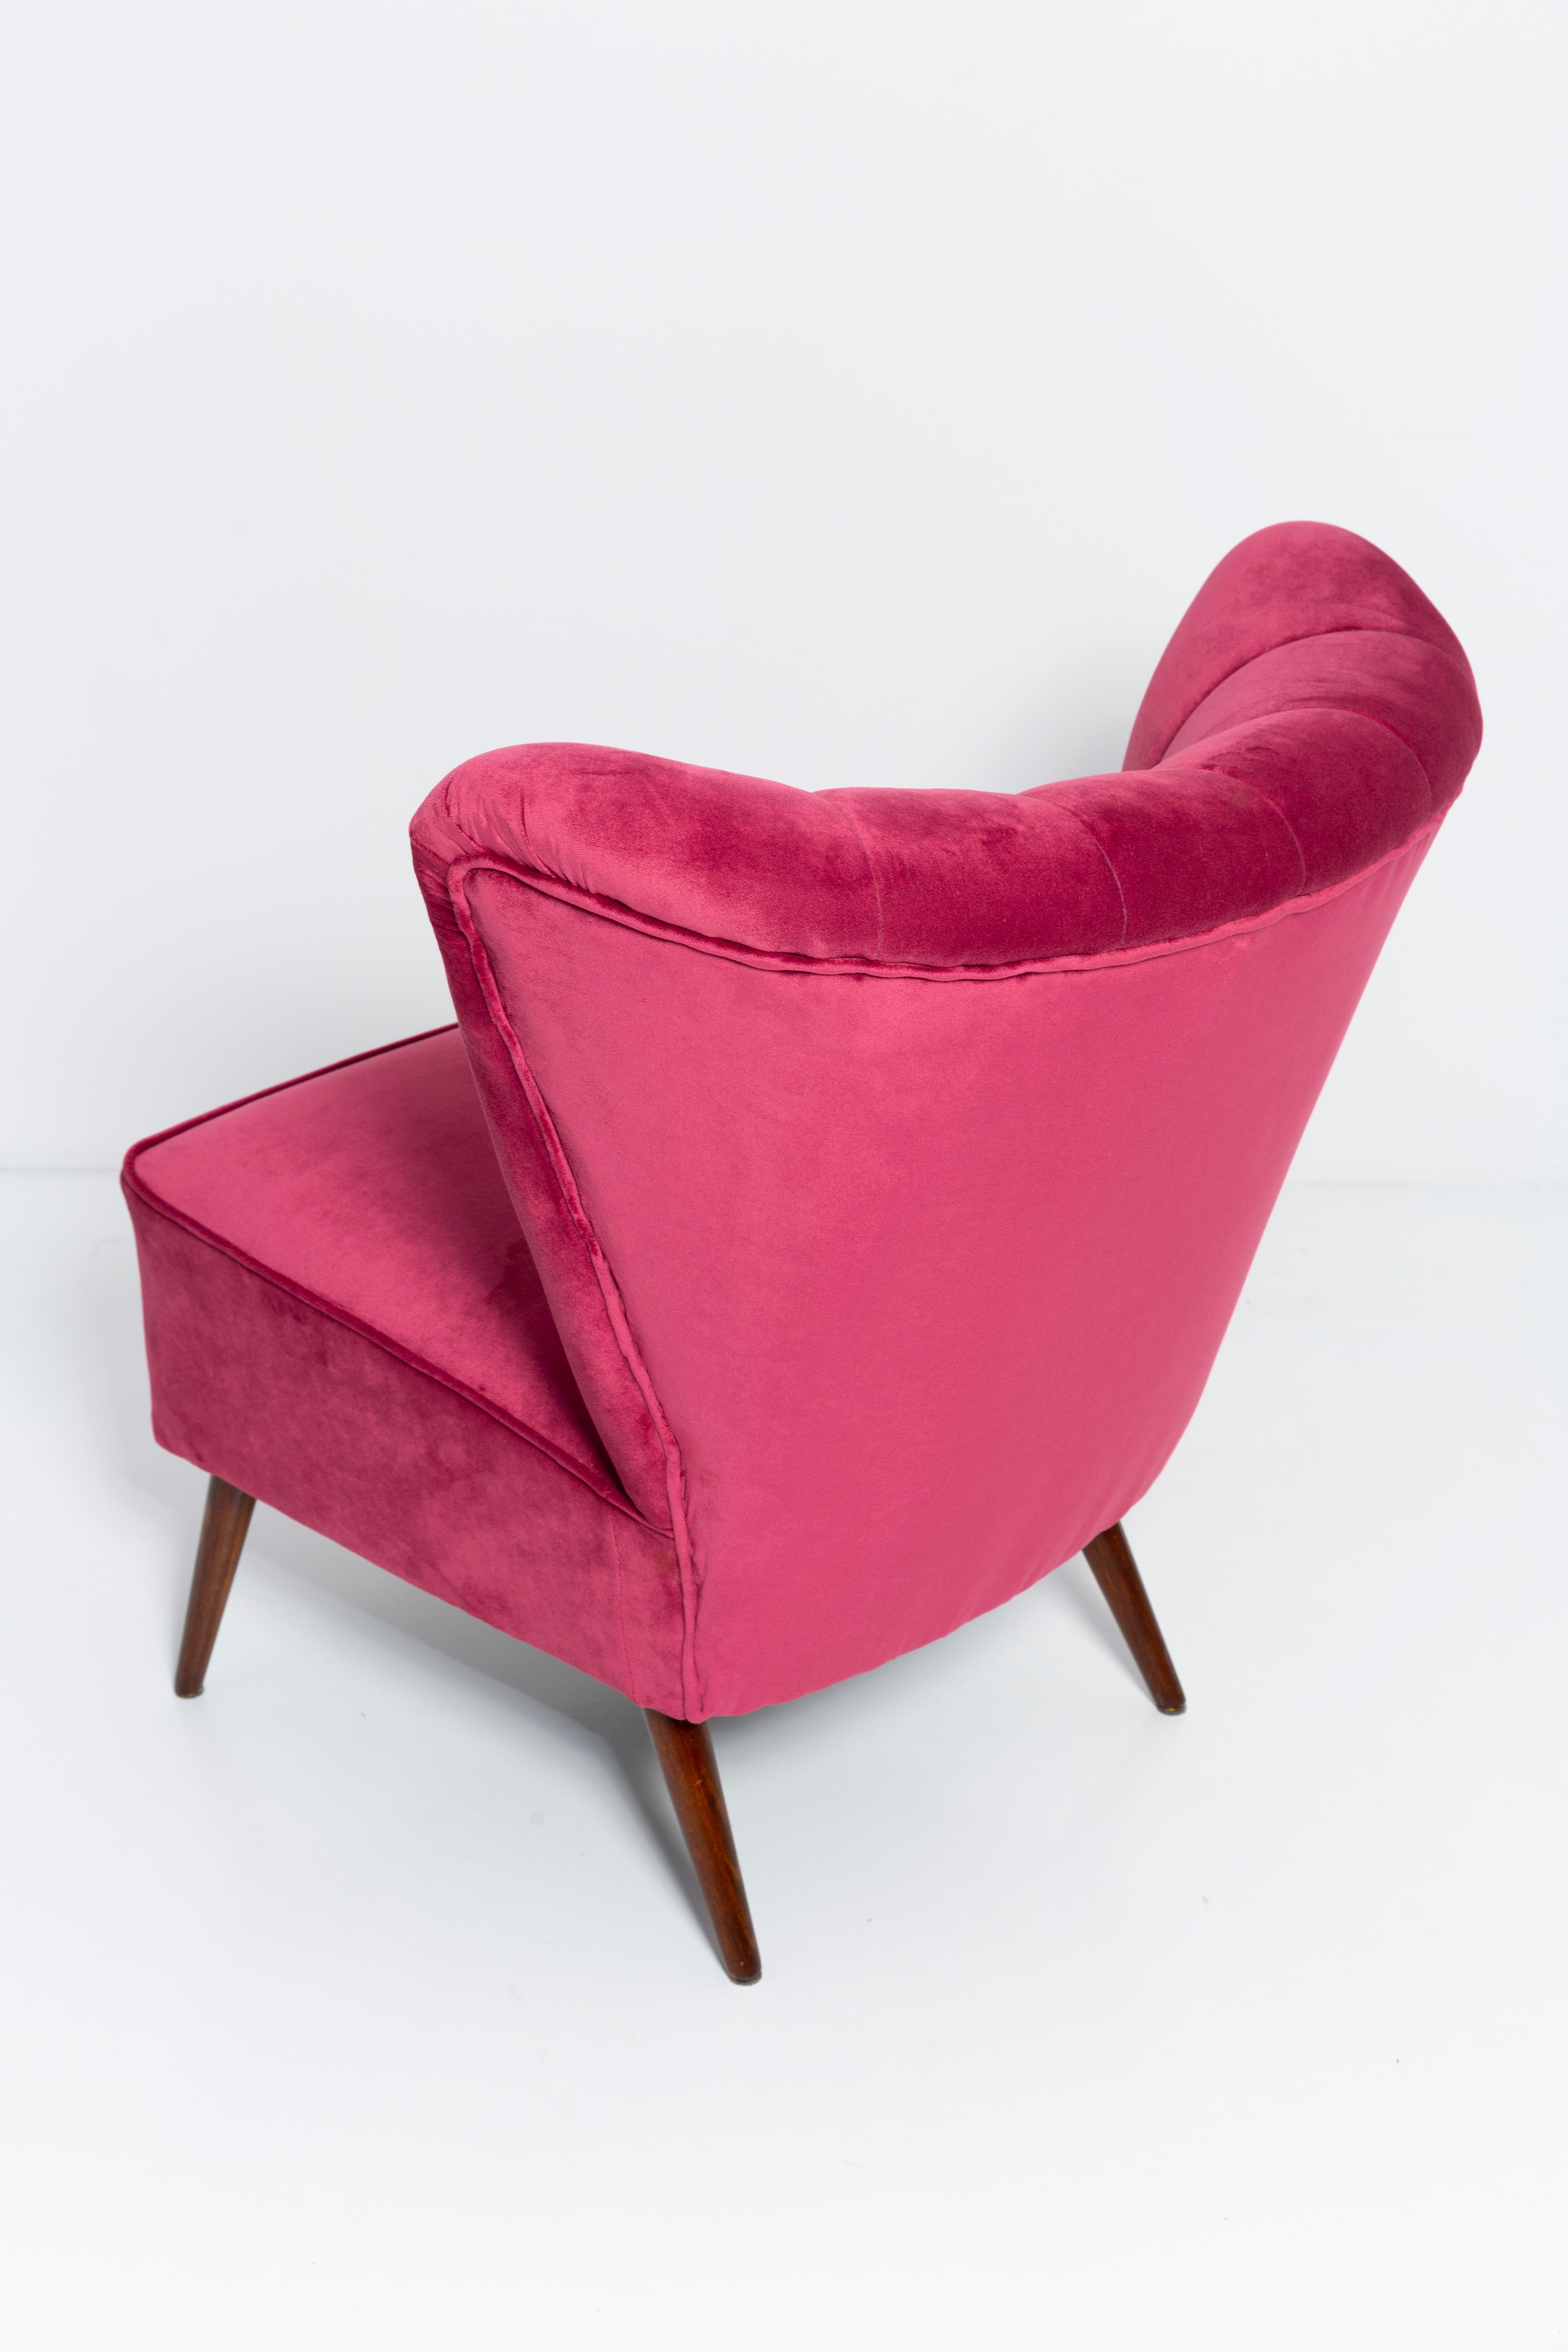 Four Midcentury Magenta Pink Velvet Club Armchairs, Europe, 1960s For Sale 4